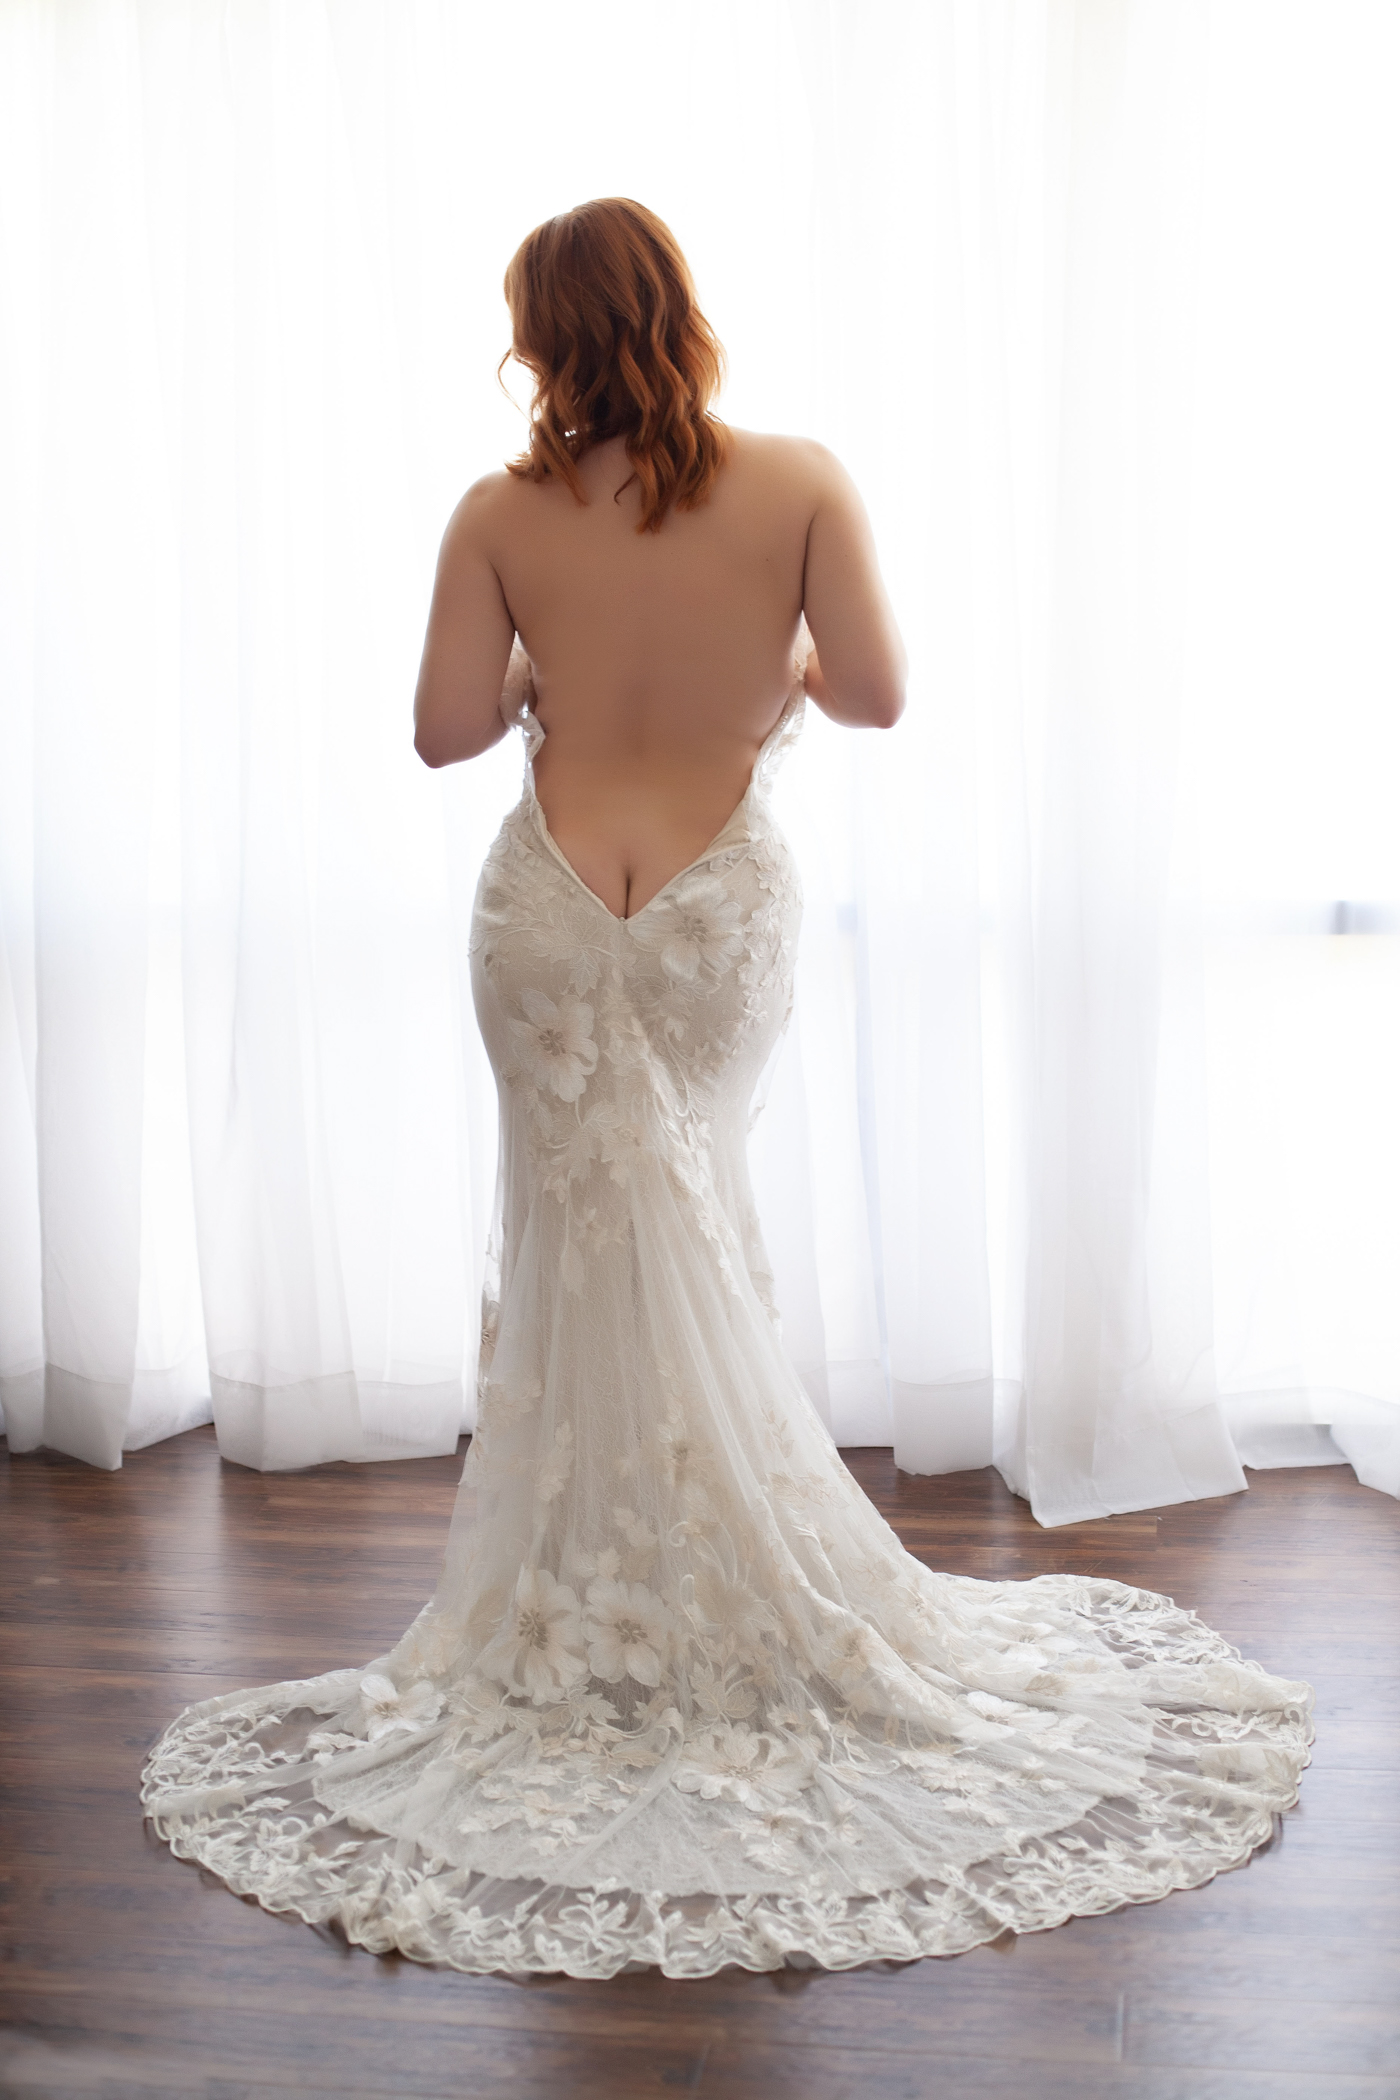 woman in low back lacey dresses at boudoir session